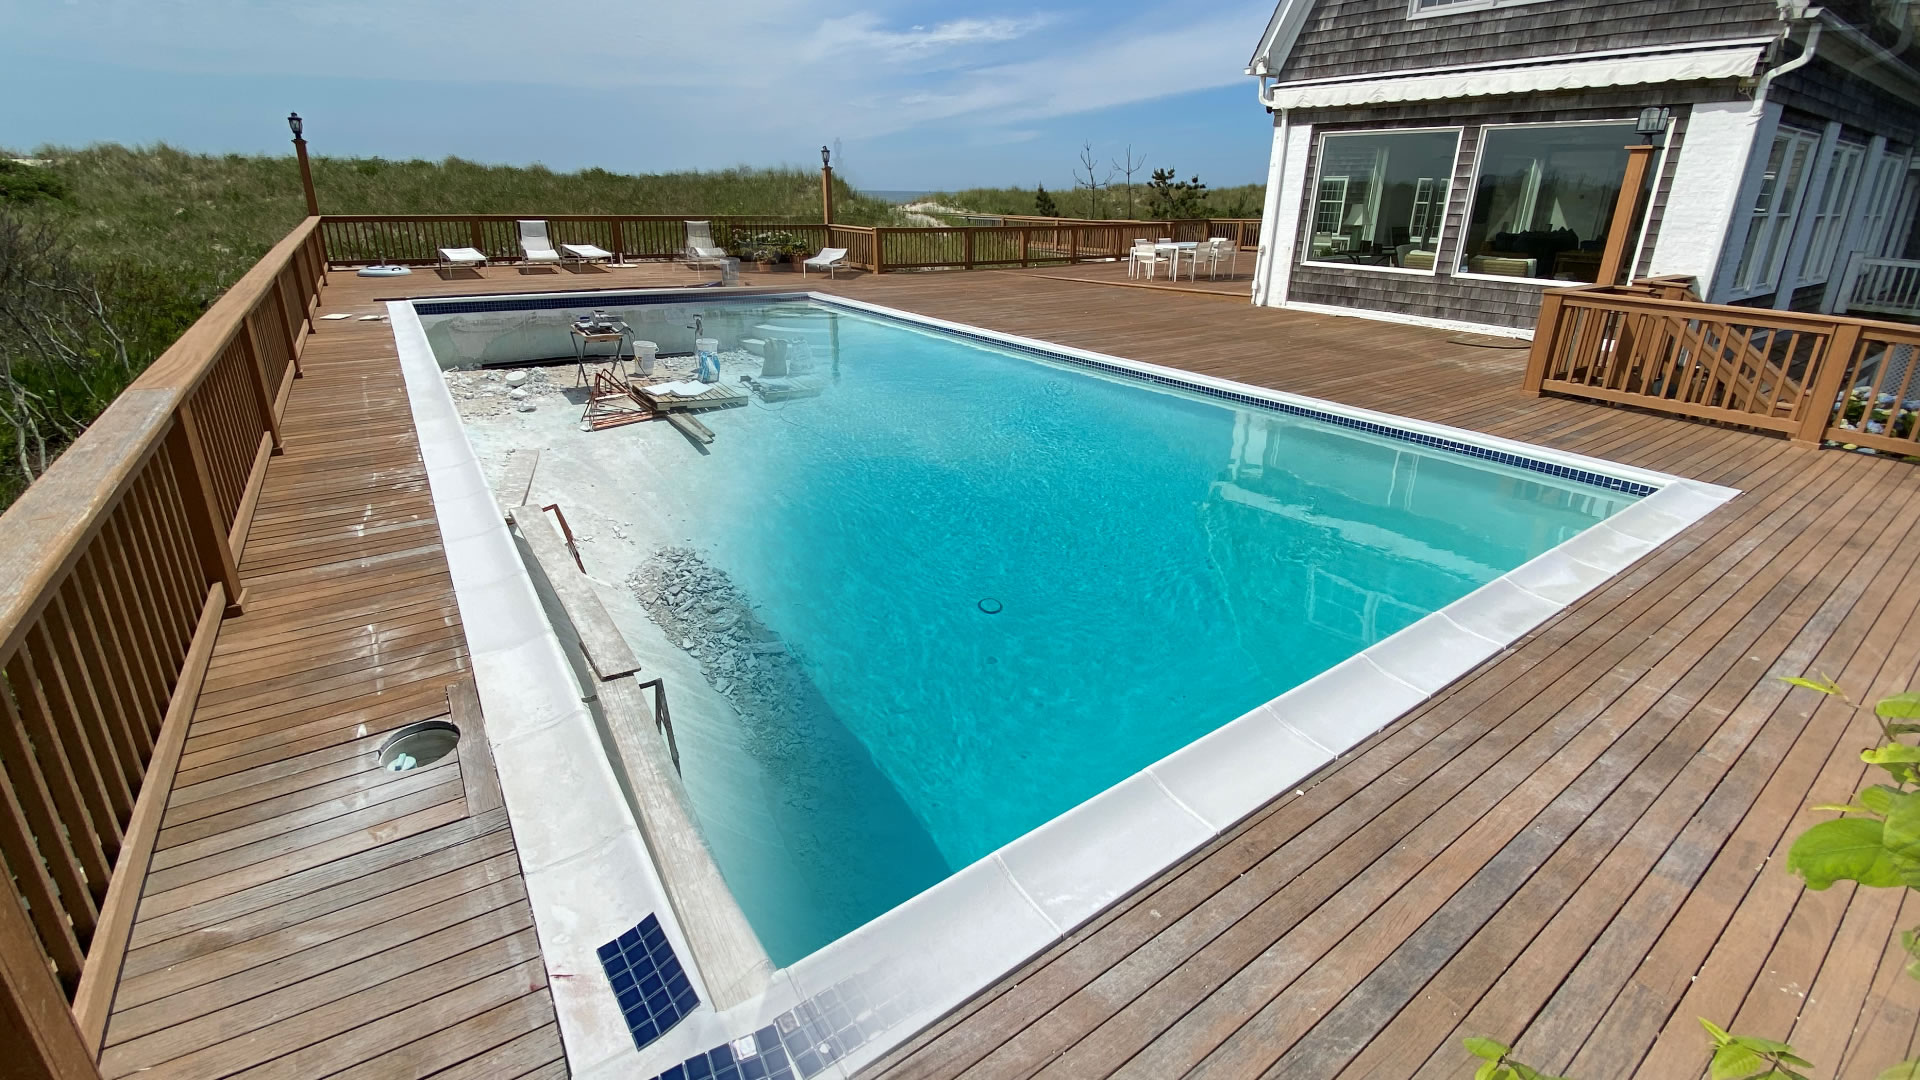 Completed Projects by Shinnecock Pools Southampton Pool Service.